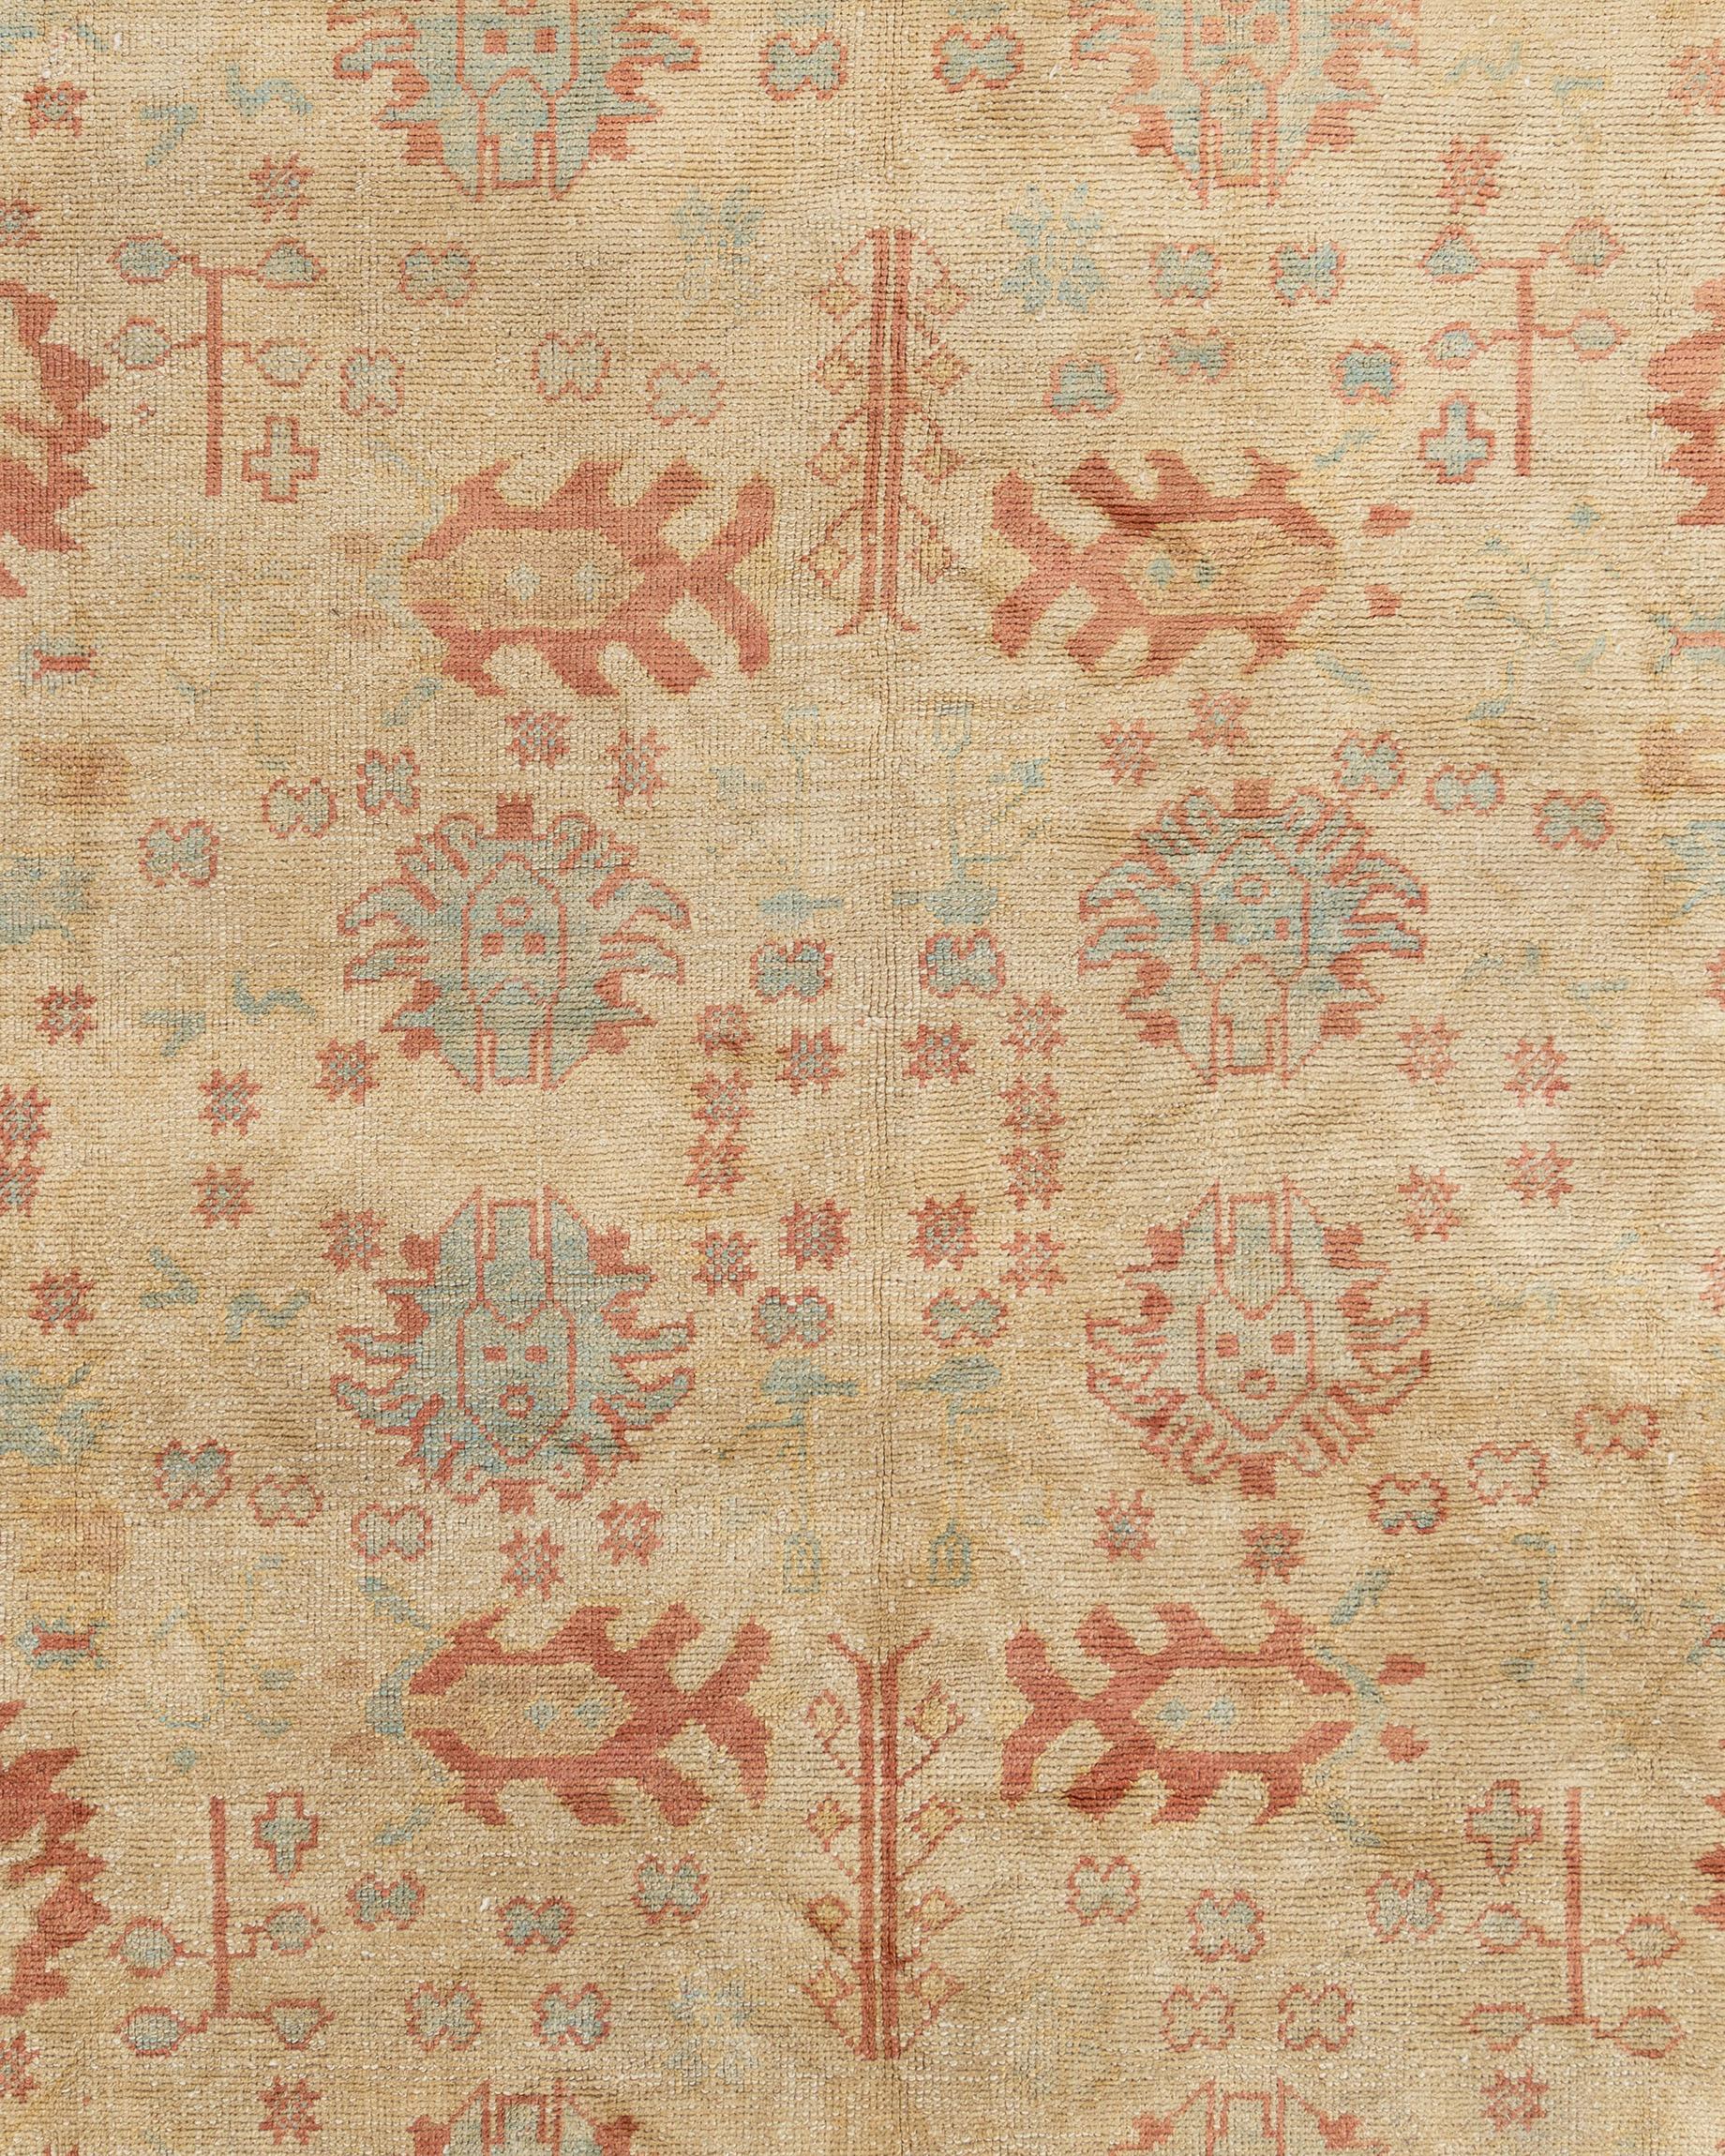 Classic Style Oushak rug. Measures: 13'6 x 16'9. Hand woven in Turkey using the finest of materials this is a classic recreation of an Oushak rug in soft colors.